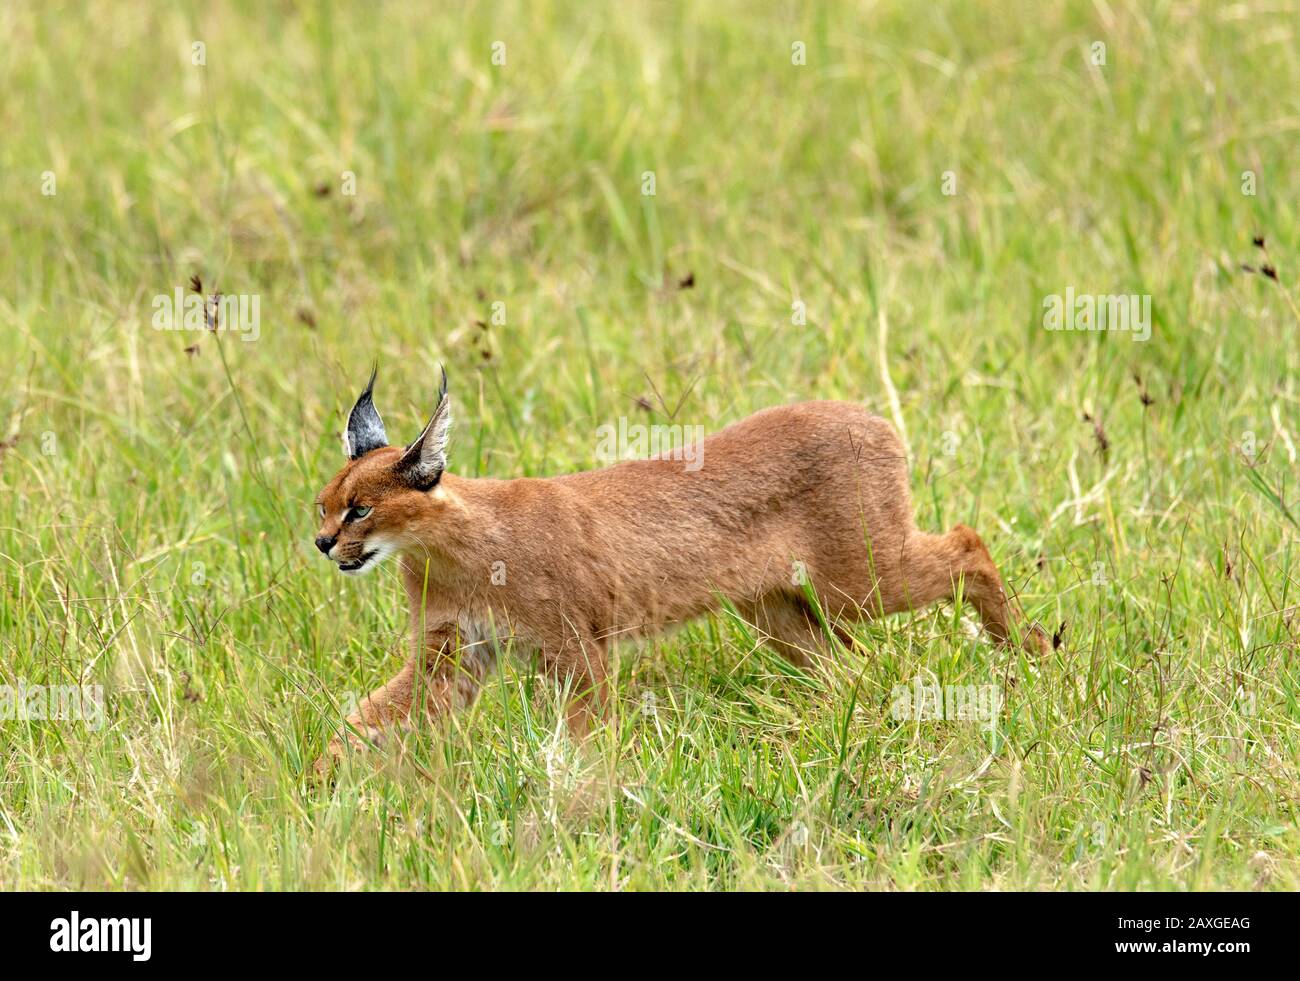 The shy and often elusive Caracal cat, spotted in the EUNSECO listed Ngorongoro Crater Conservation Area.2 of 4 images in the series. Stock Photo